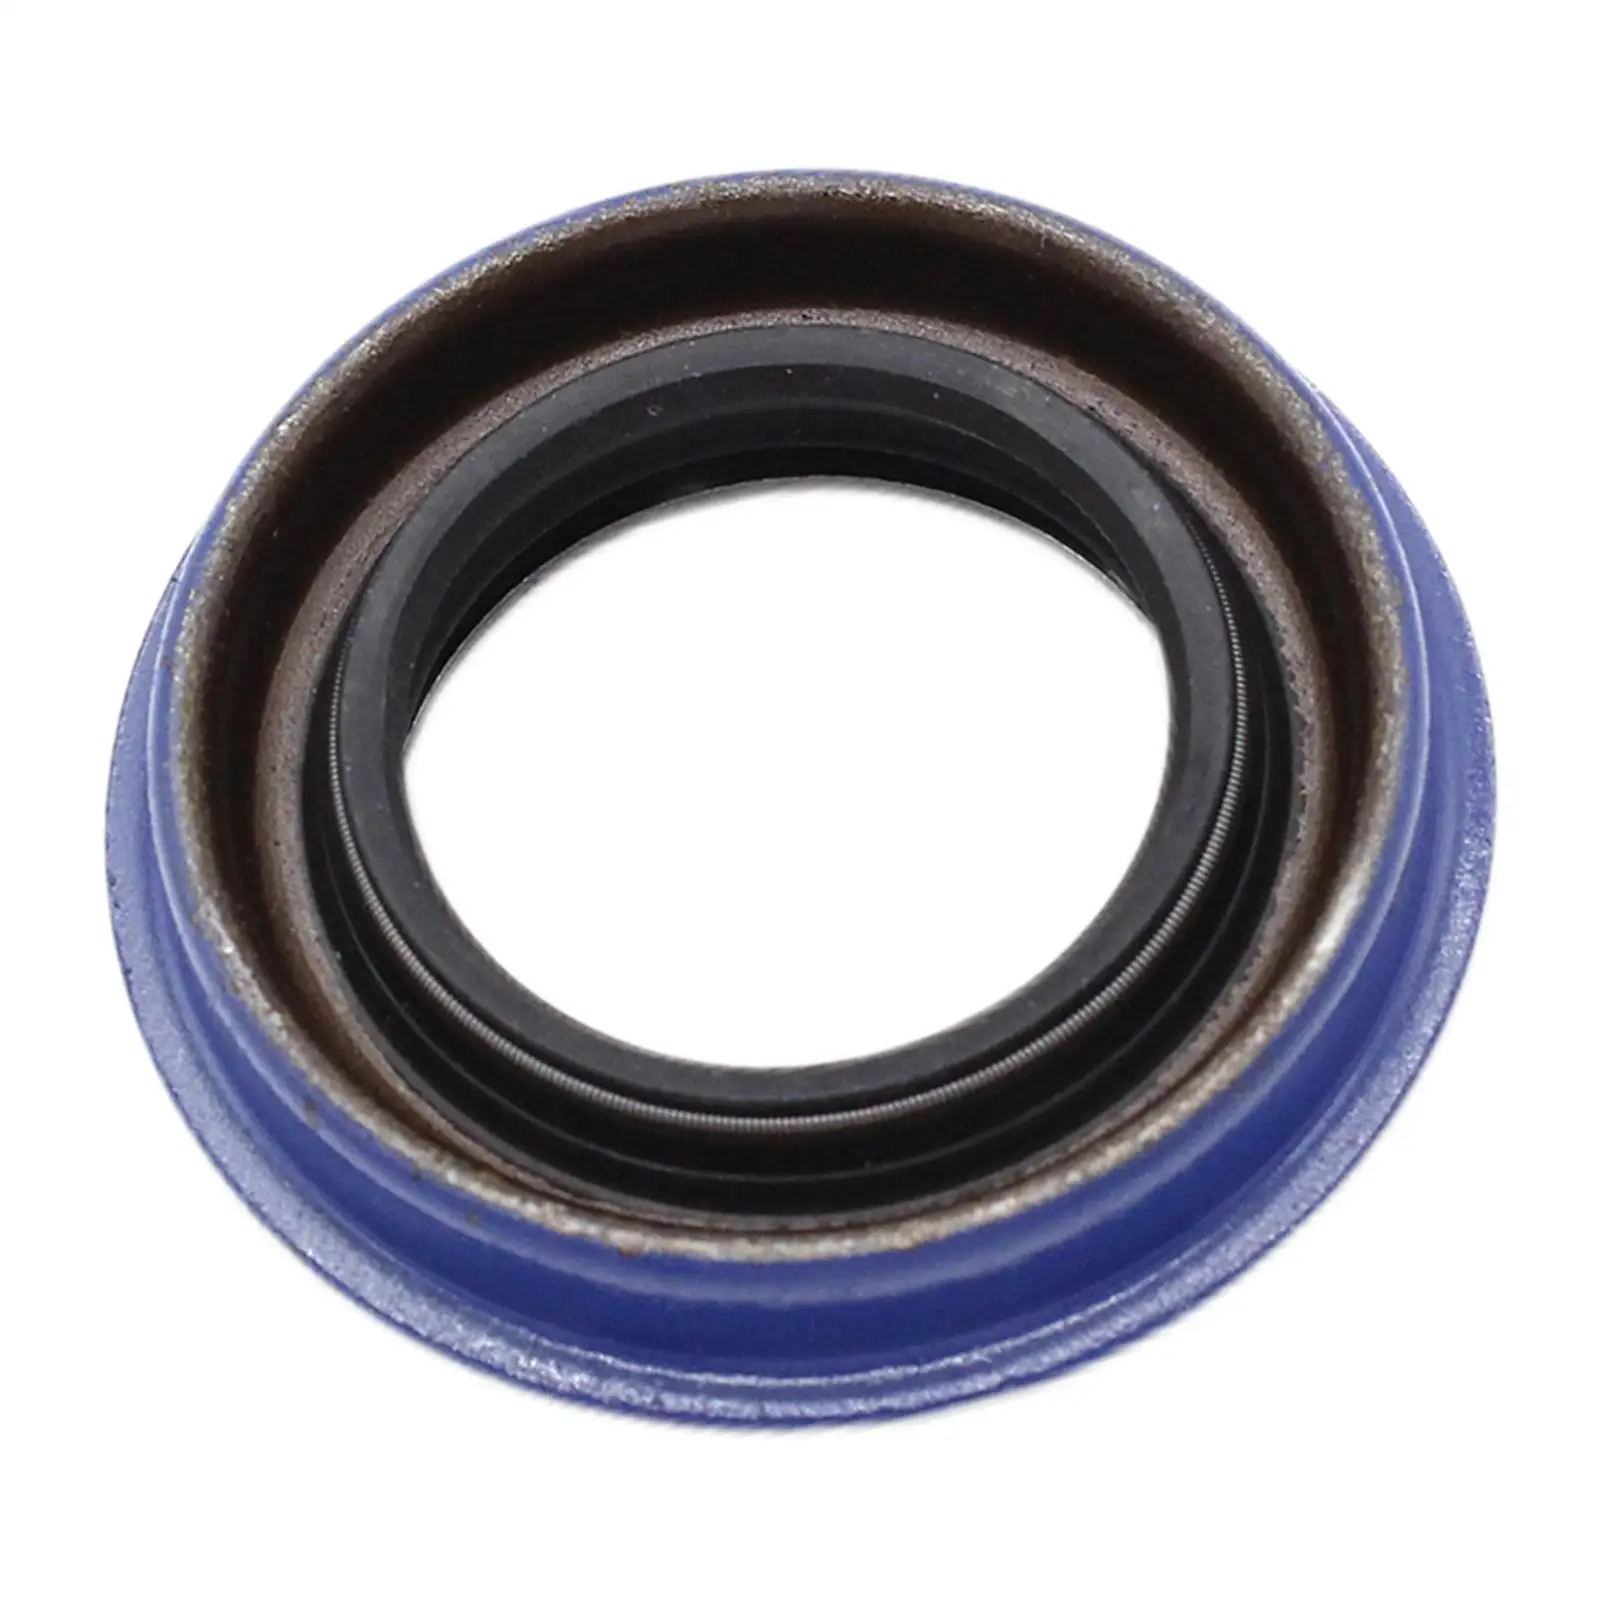 Drive Shaft Oil Seal 12755013 Replace Engine Axle Shaft Seal for Vauxhall for Opel Zafira Signum F40 M20